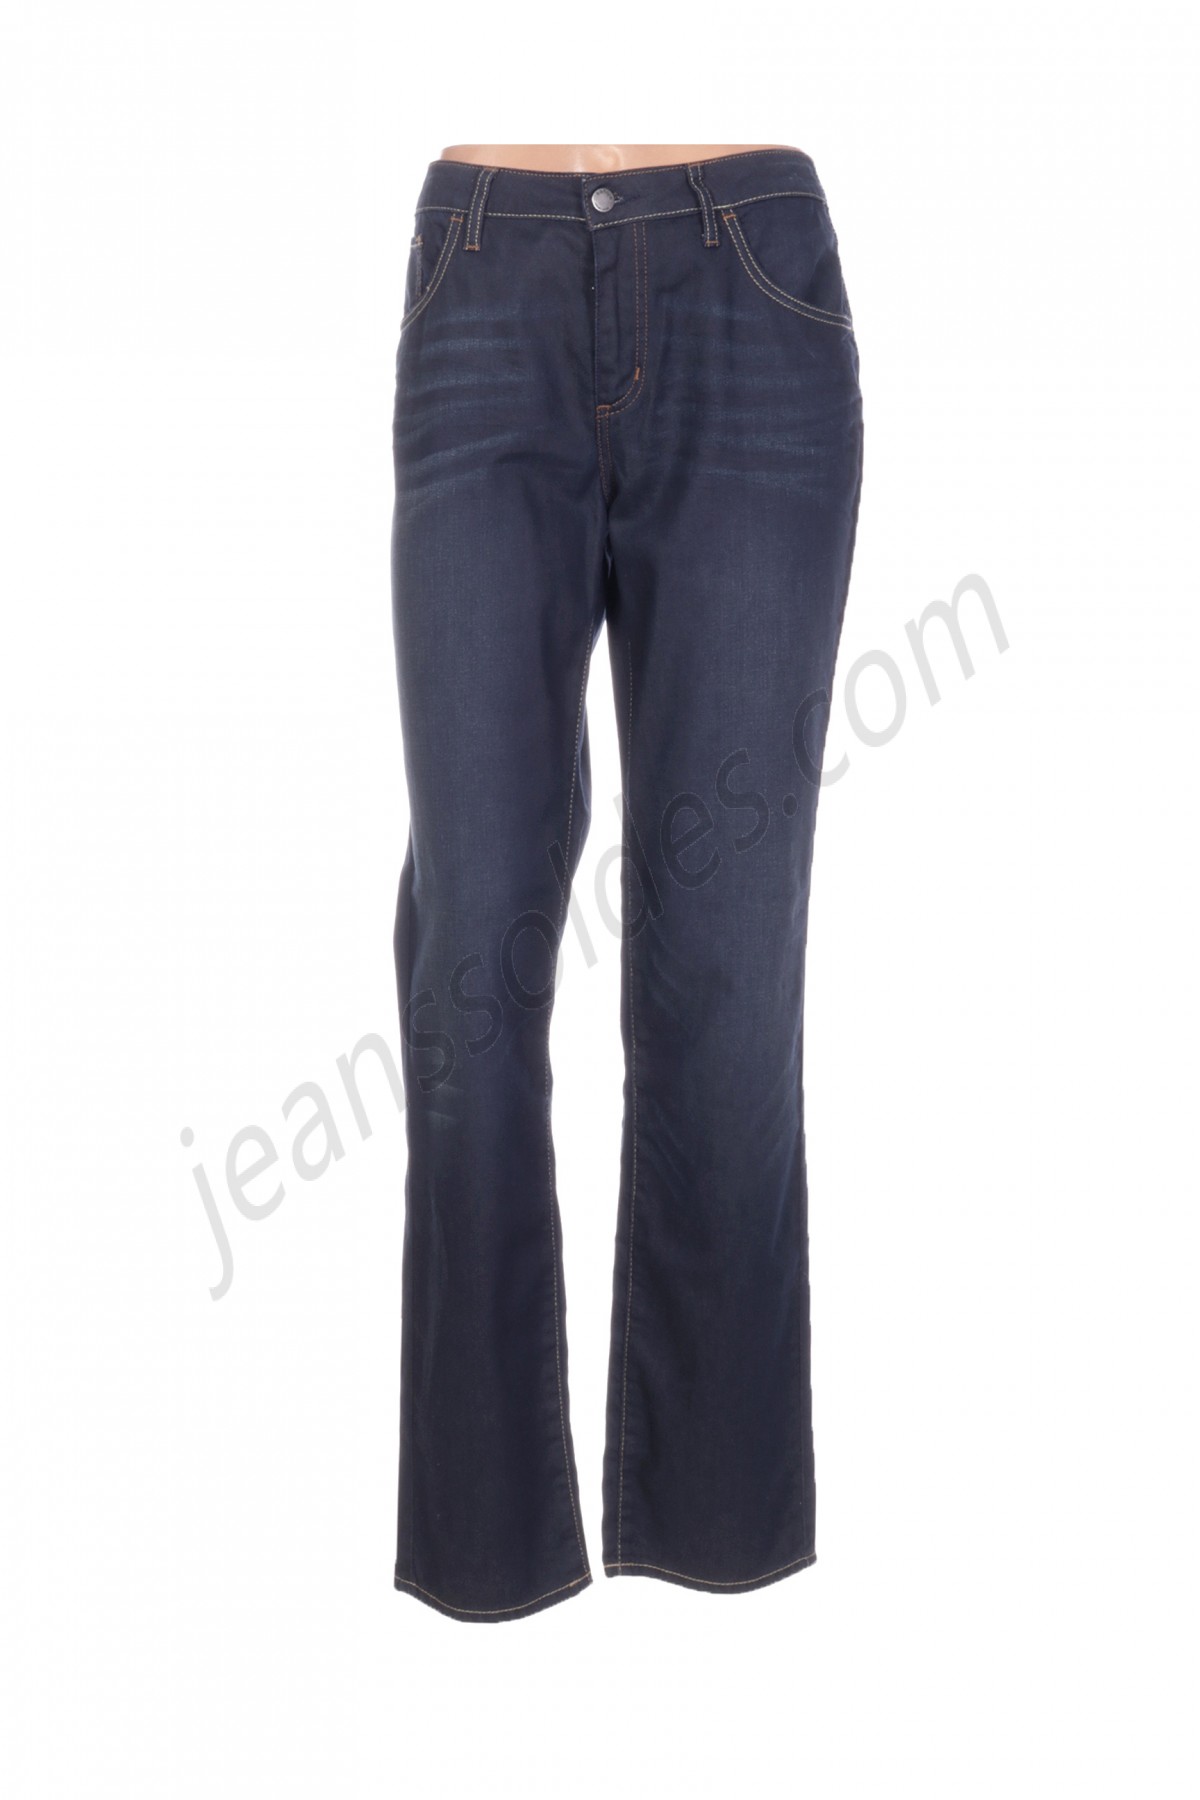 kanope-Jeans coupe slim prix d’amis - -0